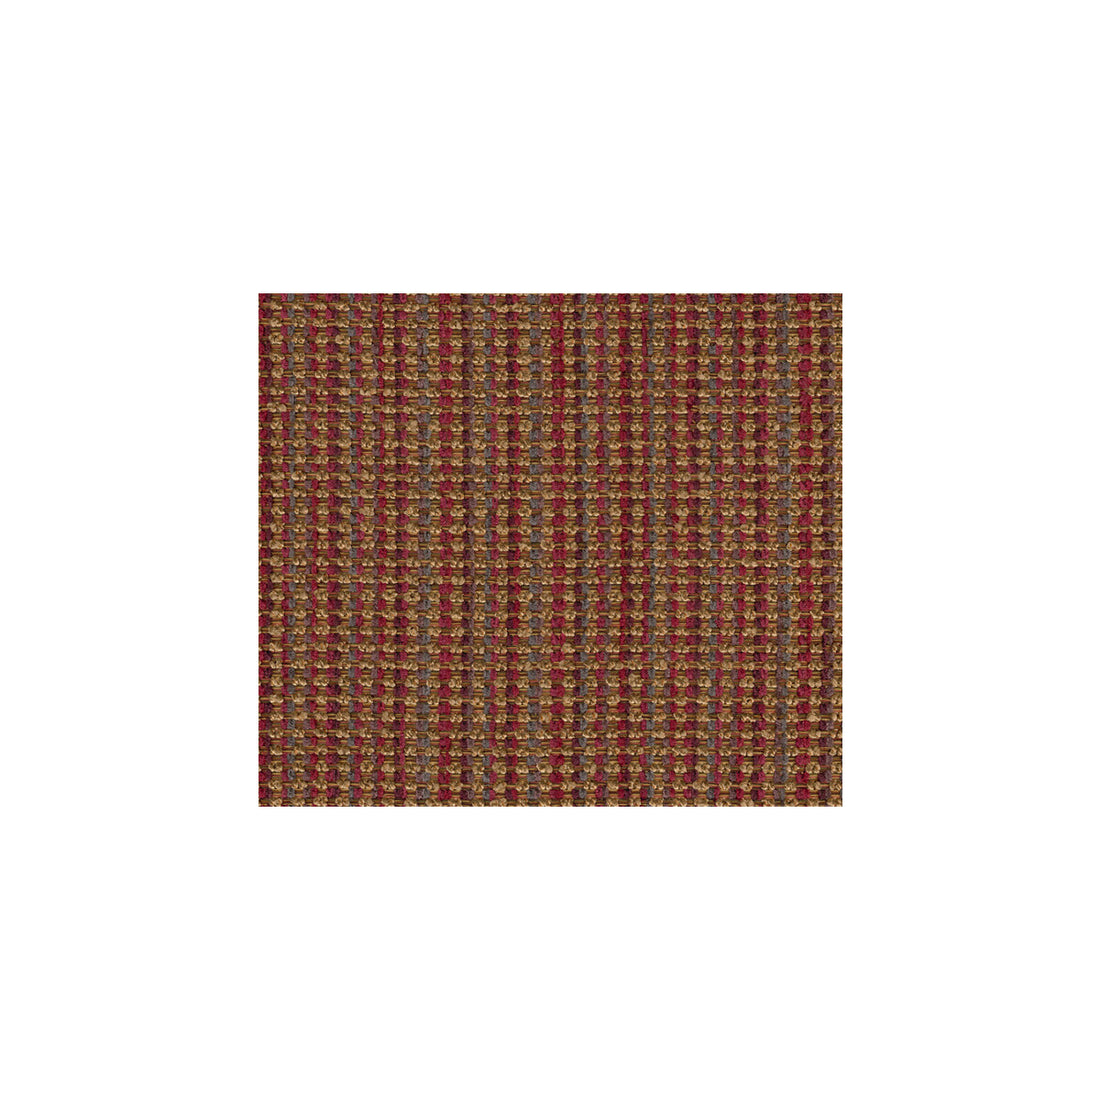 Kf Smt fabric - pattern 28769.716.0 - by Kravet Smart in the Gis collection